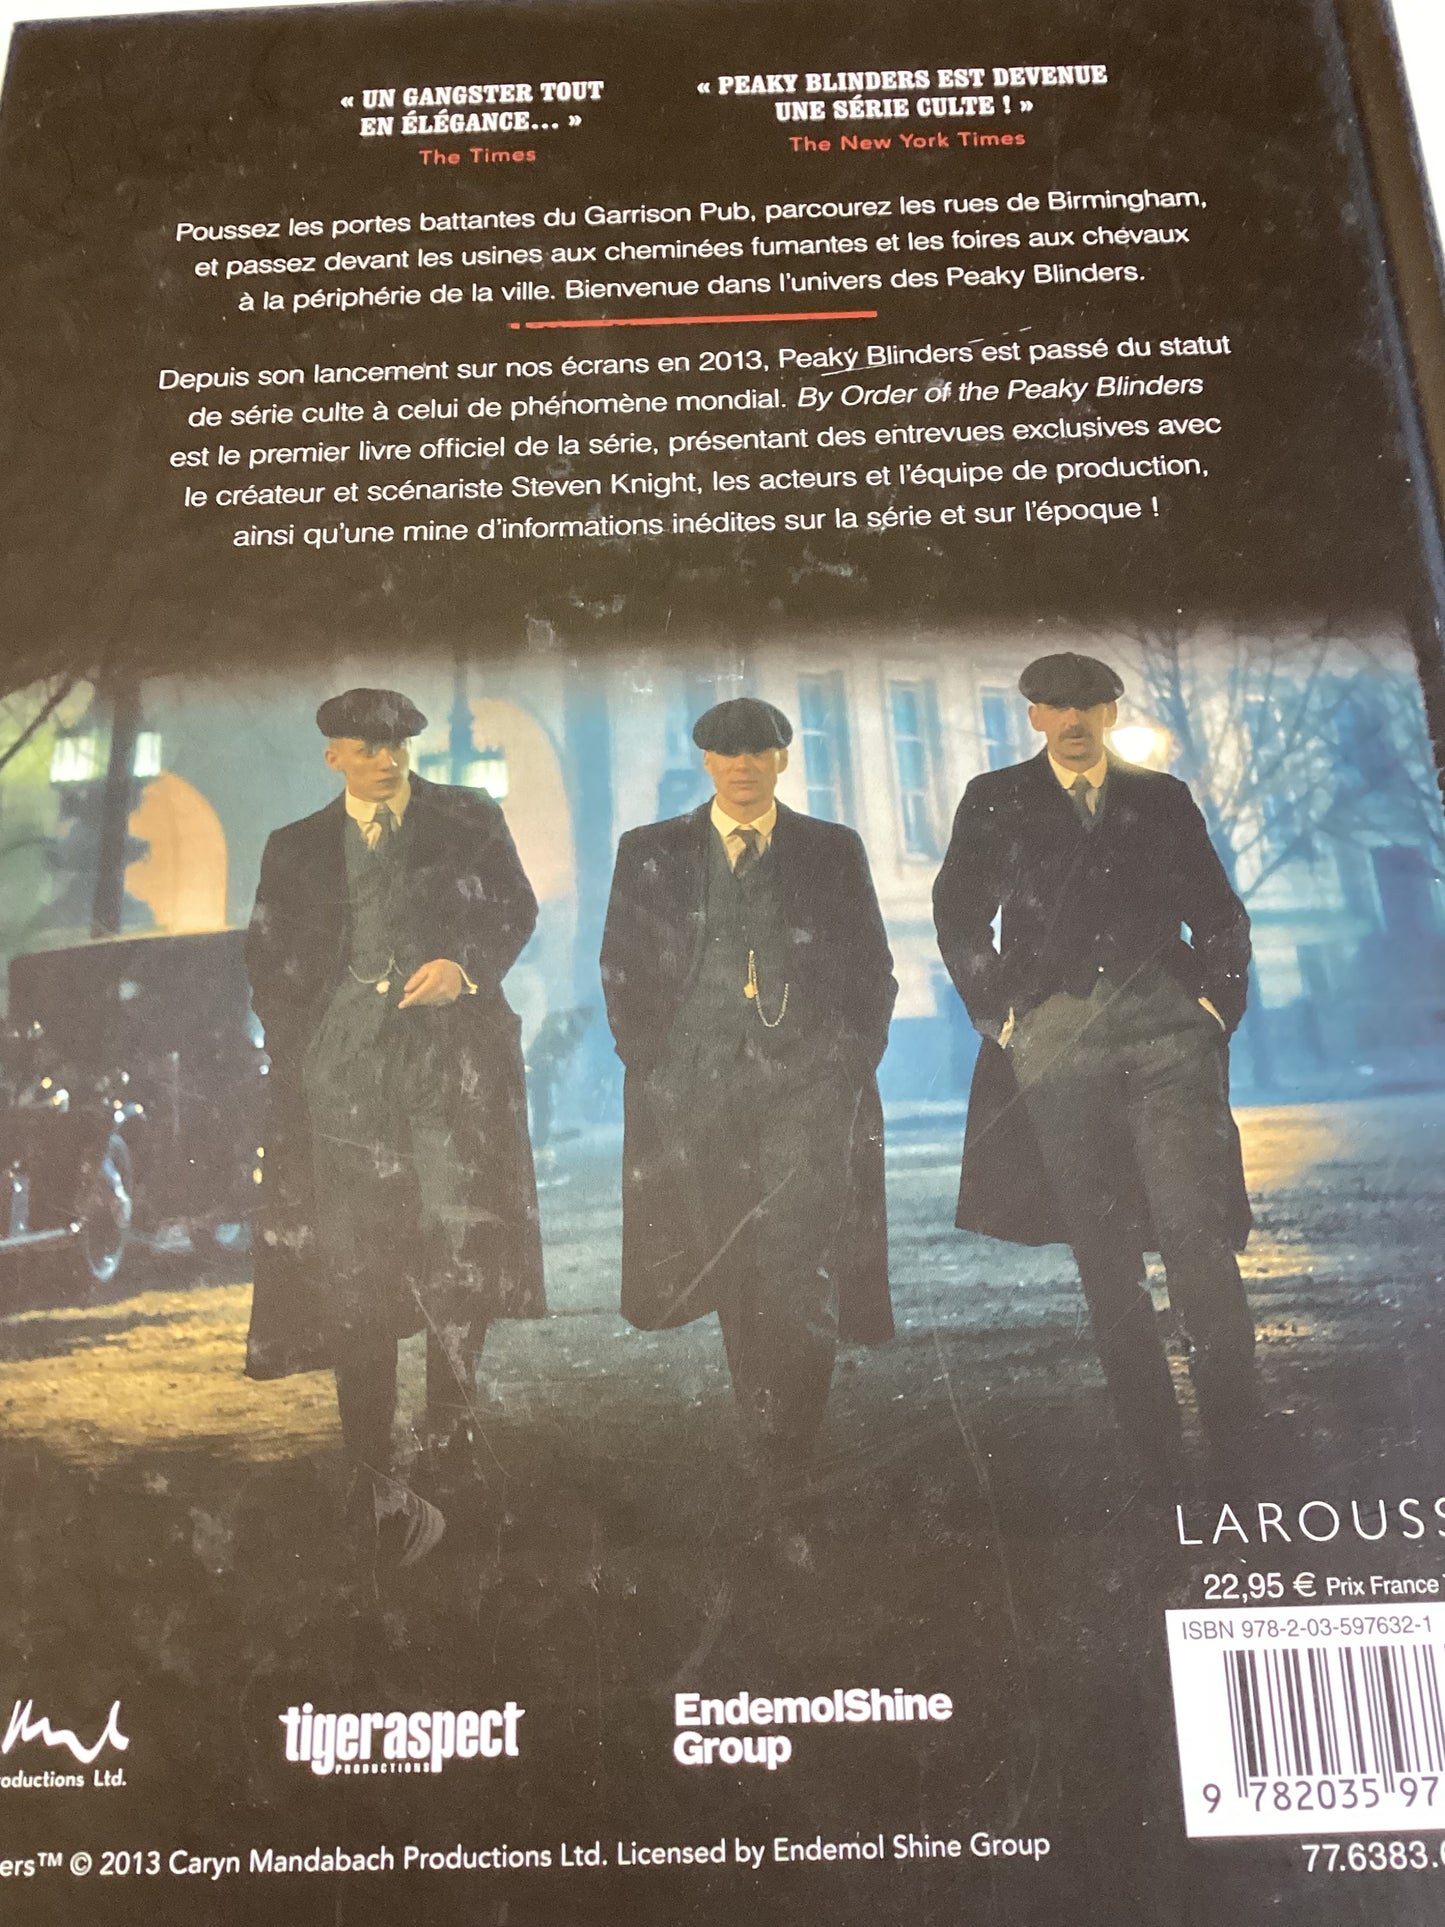 By Order Of The Peaky Blinders Introduction De Steven Knight French